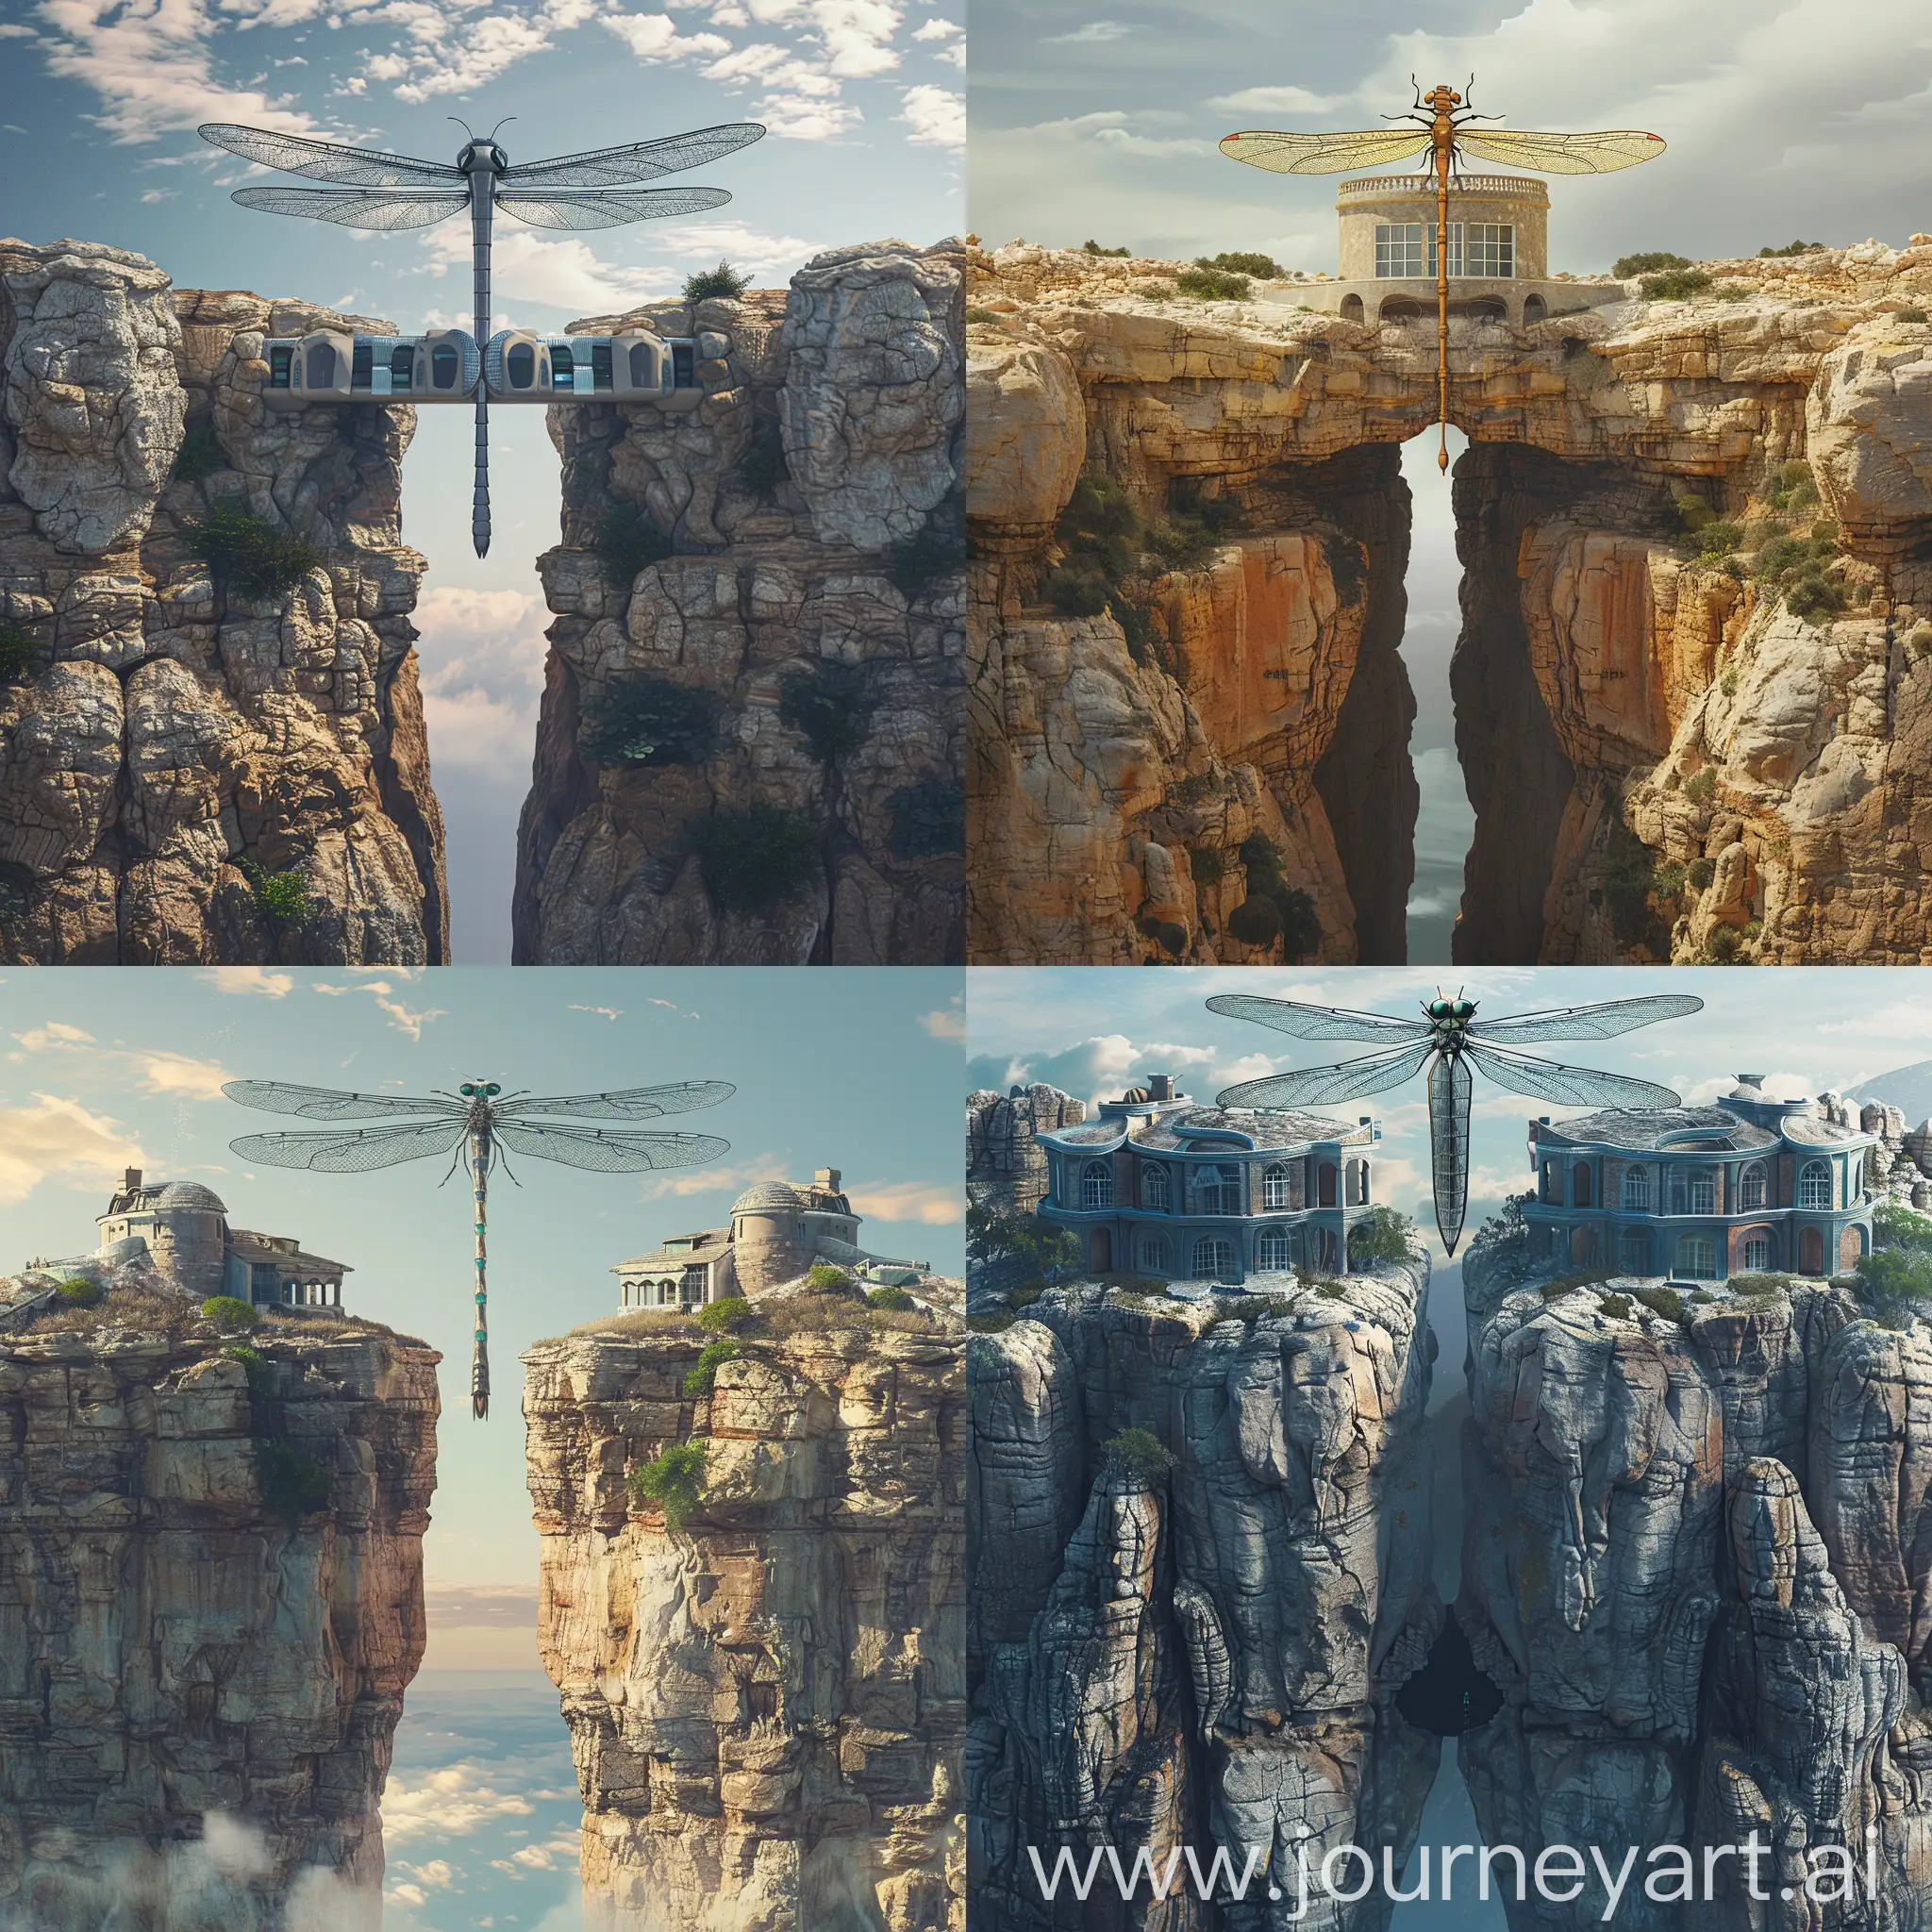 a metaverse dragonfly shaped villa on top of tw cliffs acting as a bride between them with each end of the villa on top of either sides of the cliff